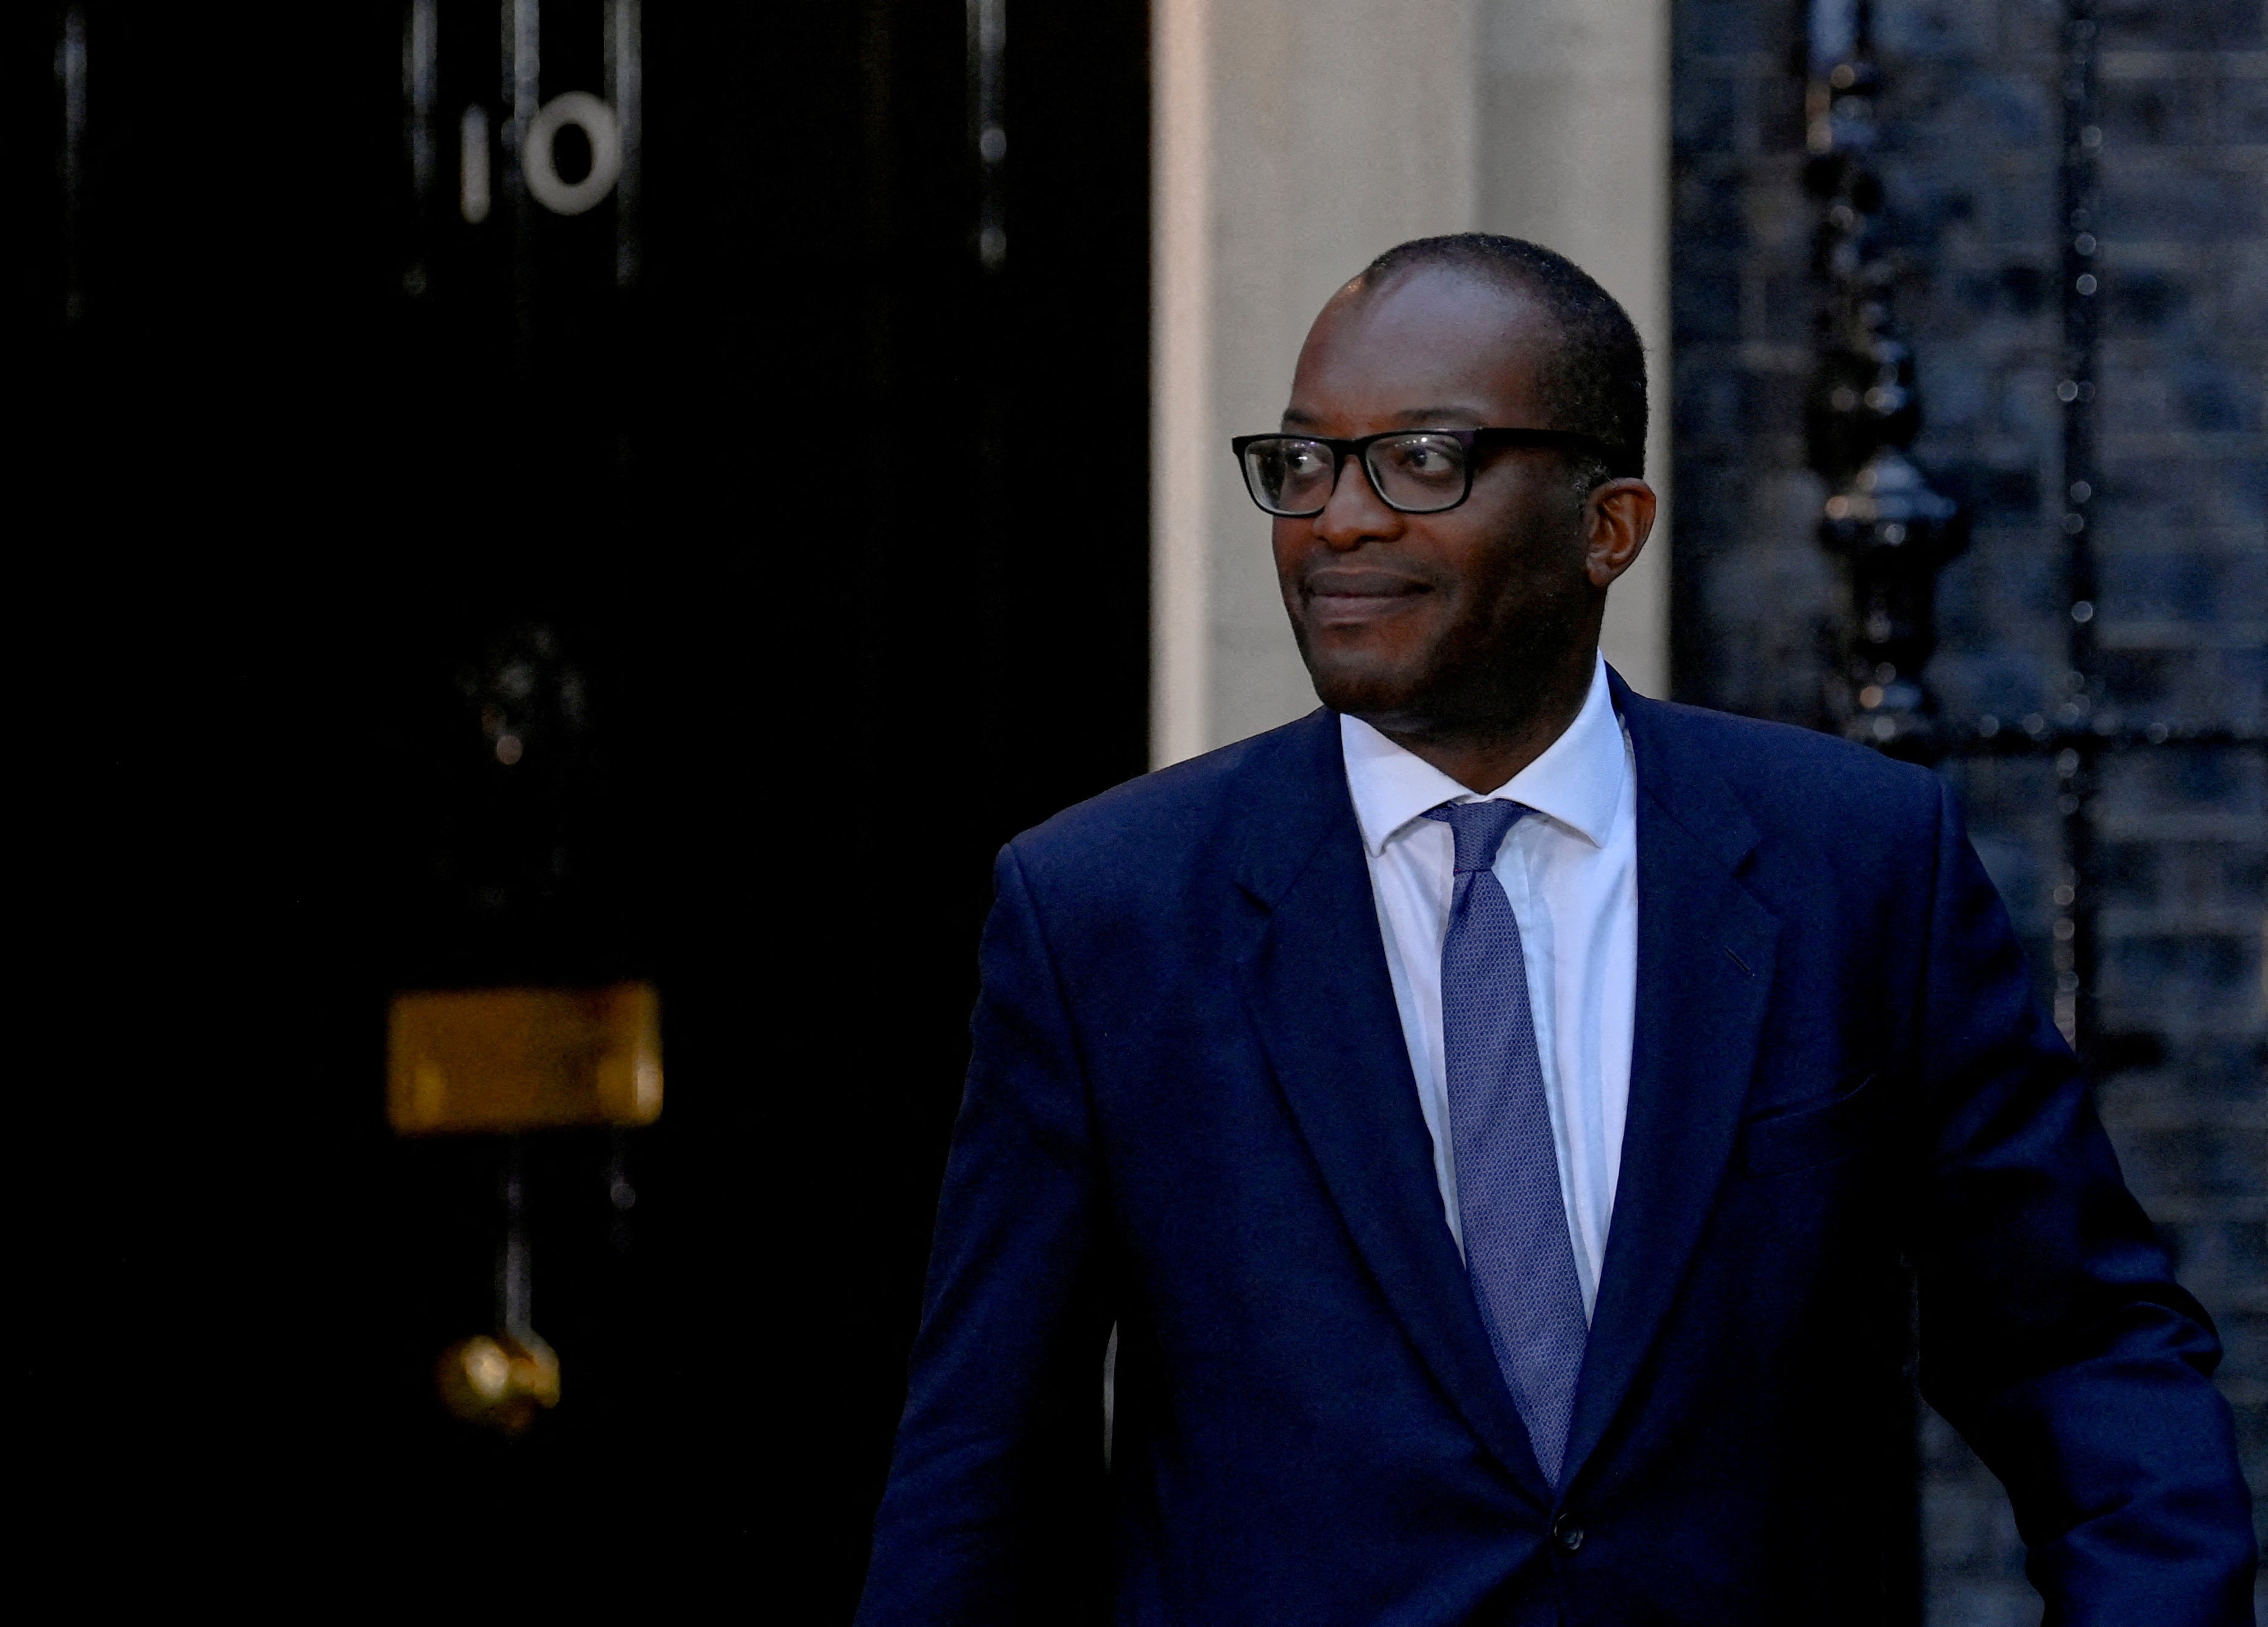 Kwasi Kwarteng will give a fiscal statement on 23 November